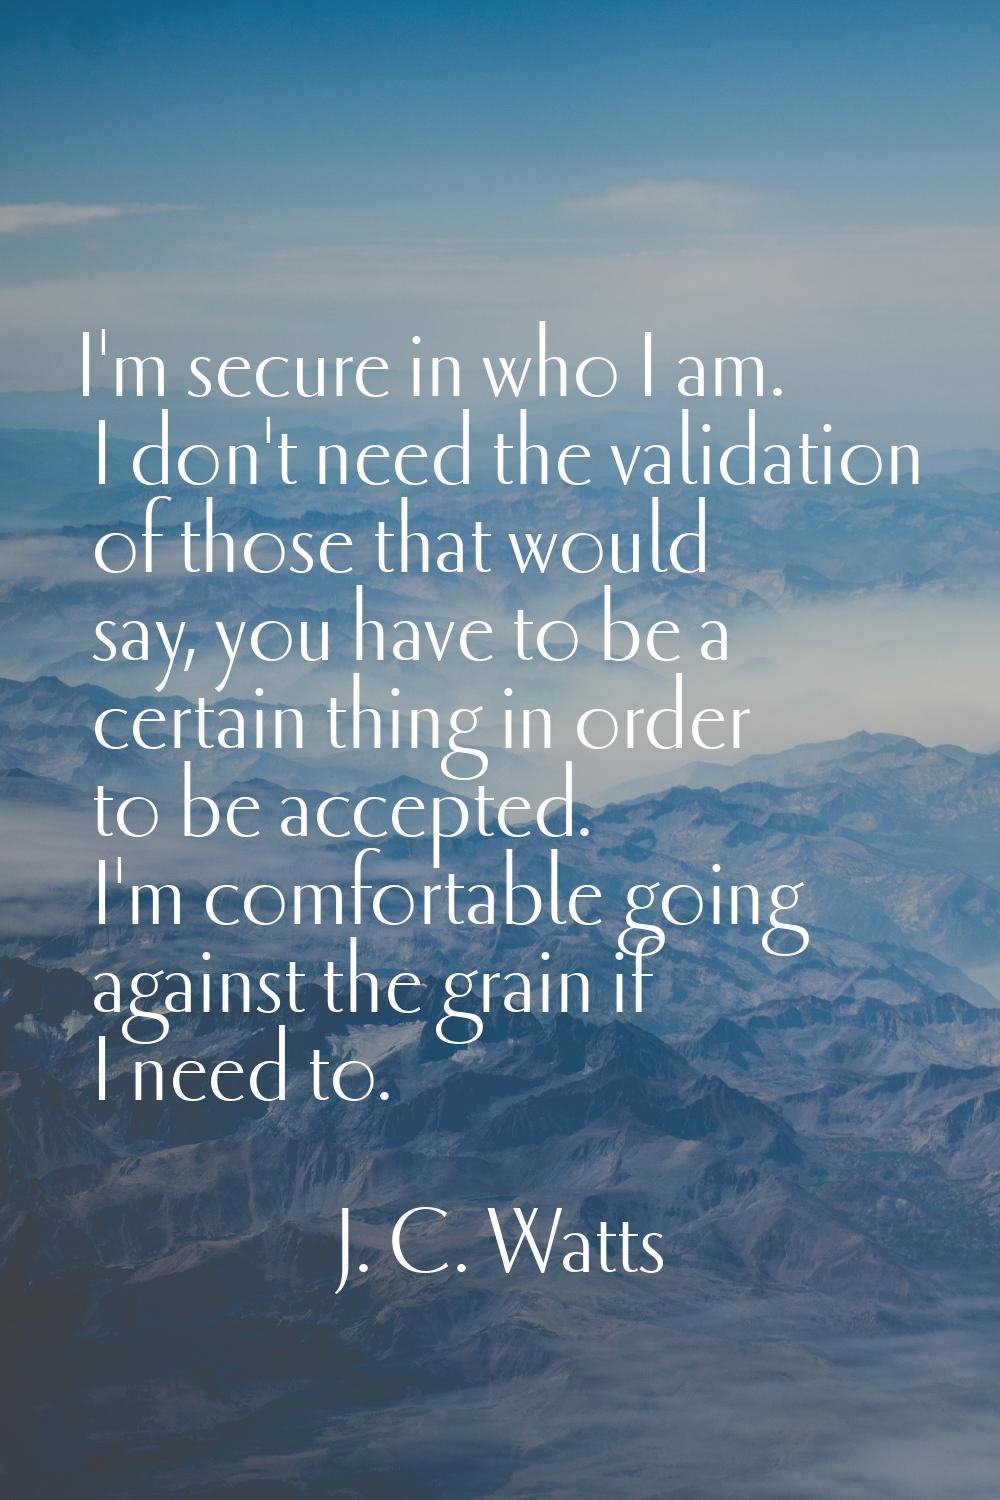 I'm secure in who I am. I don't need the validation of those that would say, you have to be a certa